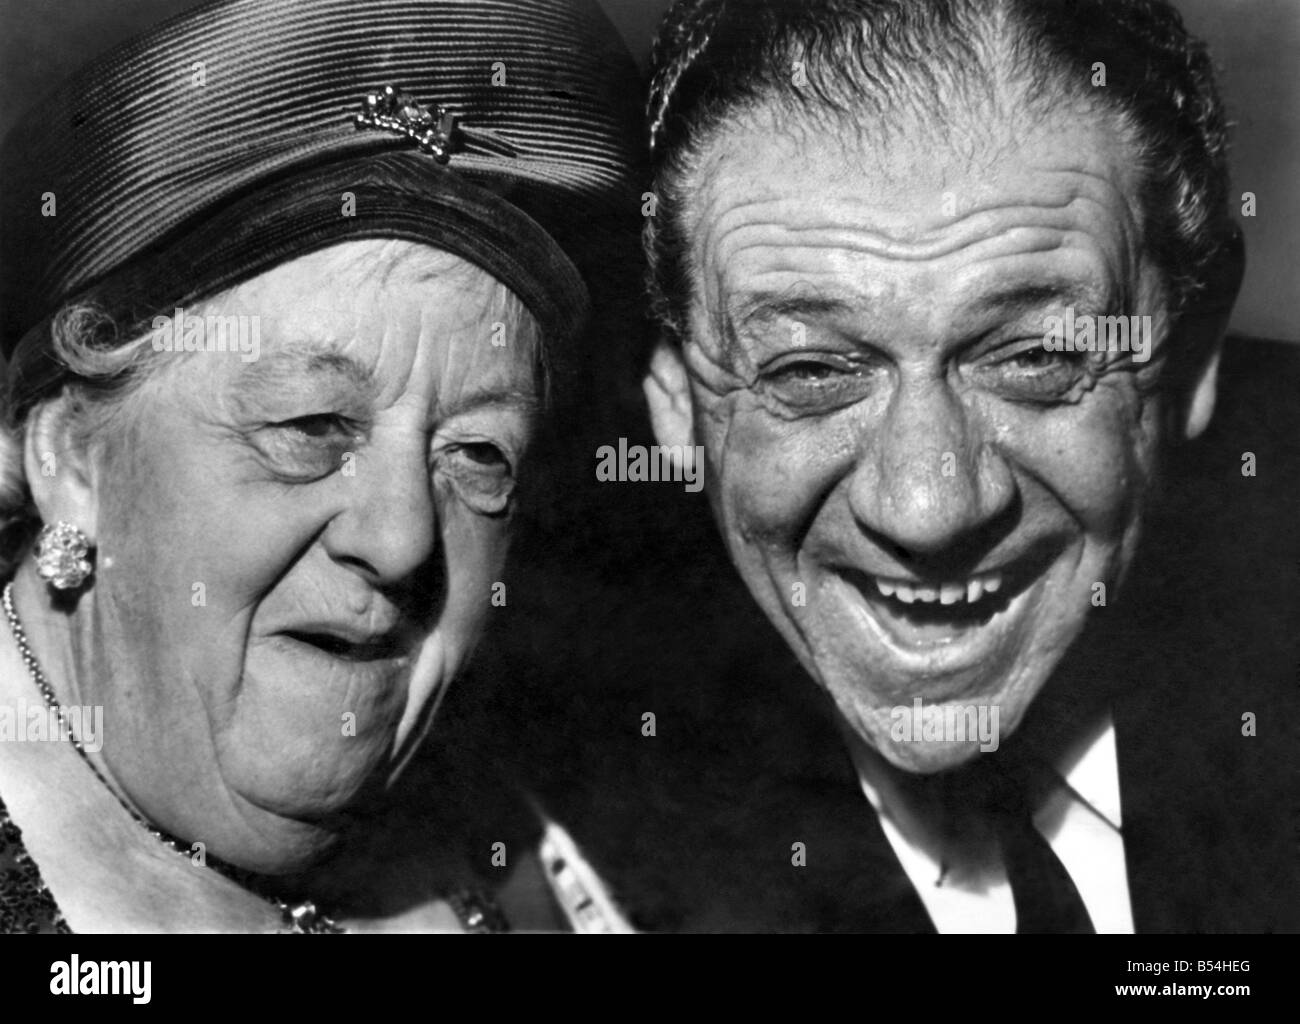 Margaret Rutherford and Sid James. April 1965 P011168 Stock Photo